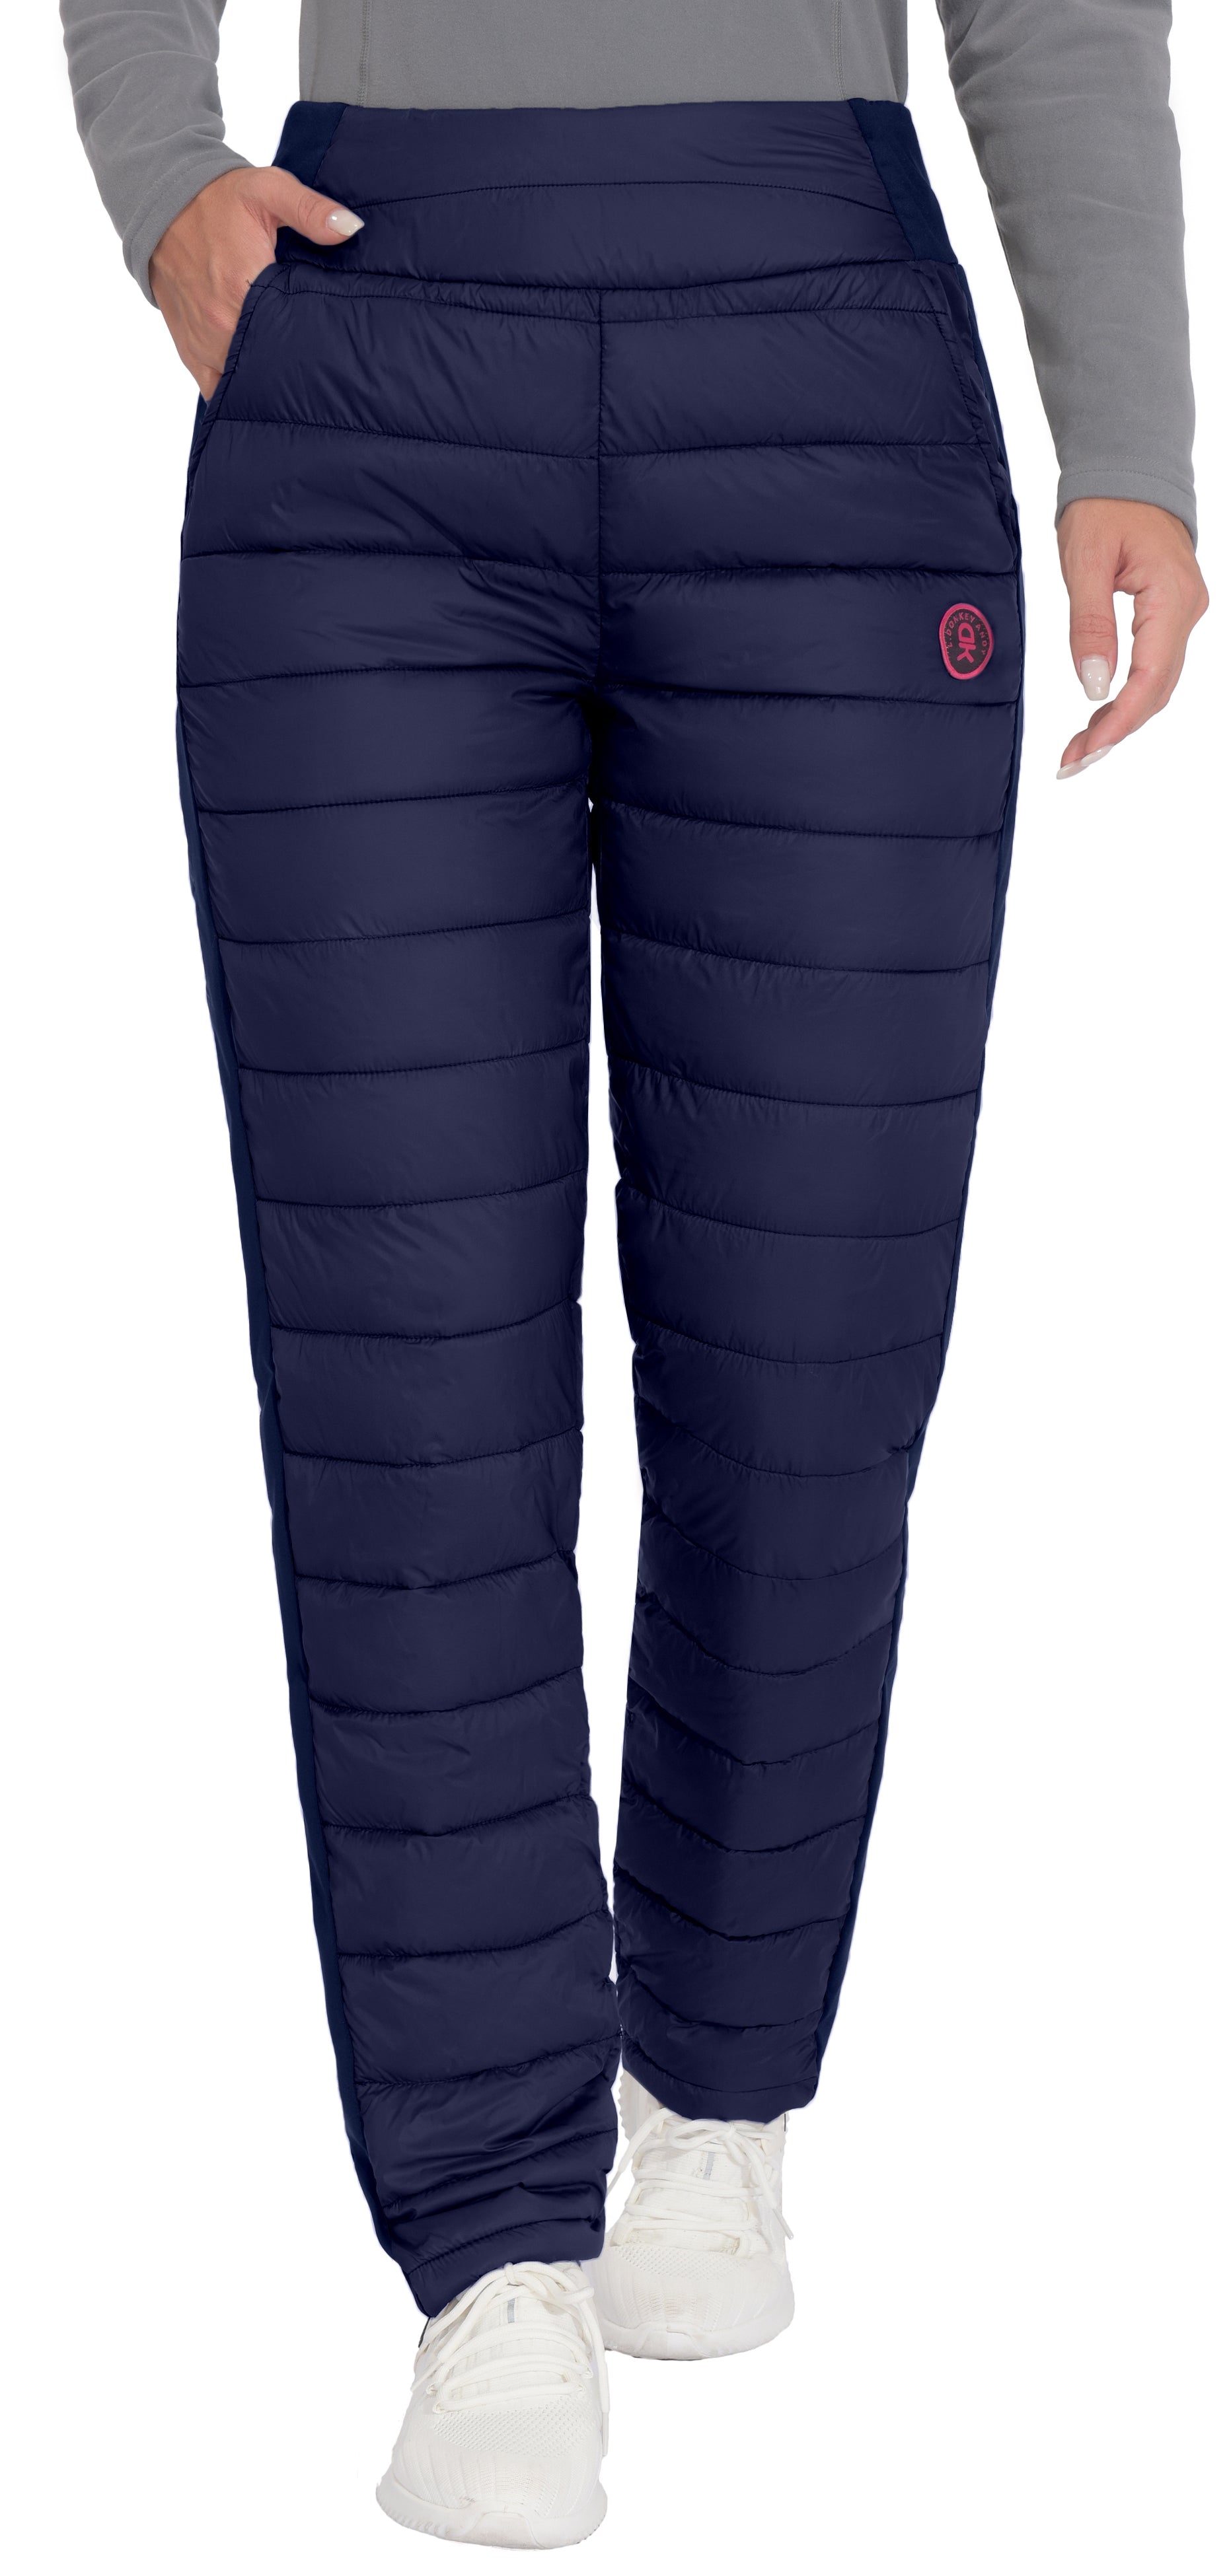 Down Pants for Women Lightweight Puffy Sweat Pants Quilted Snow